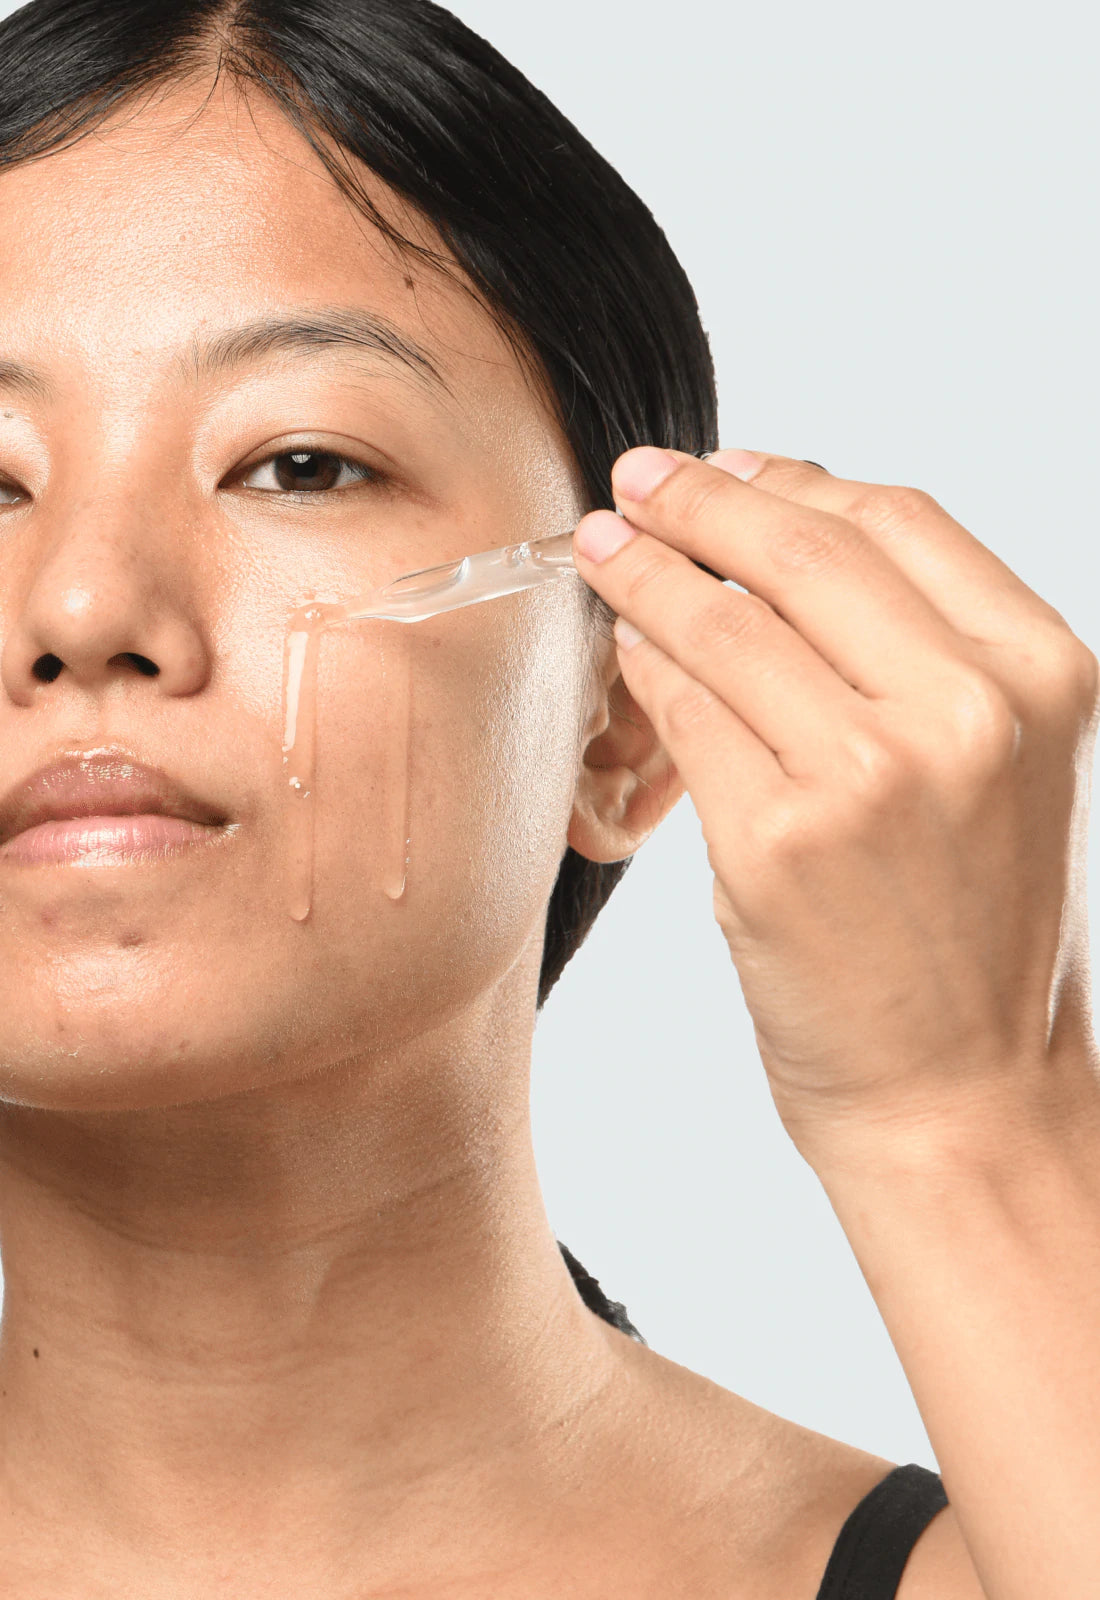 How to Use Glycerin In Your Skincare Routine